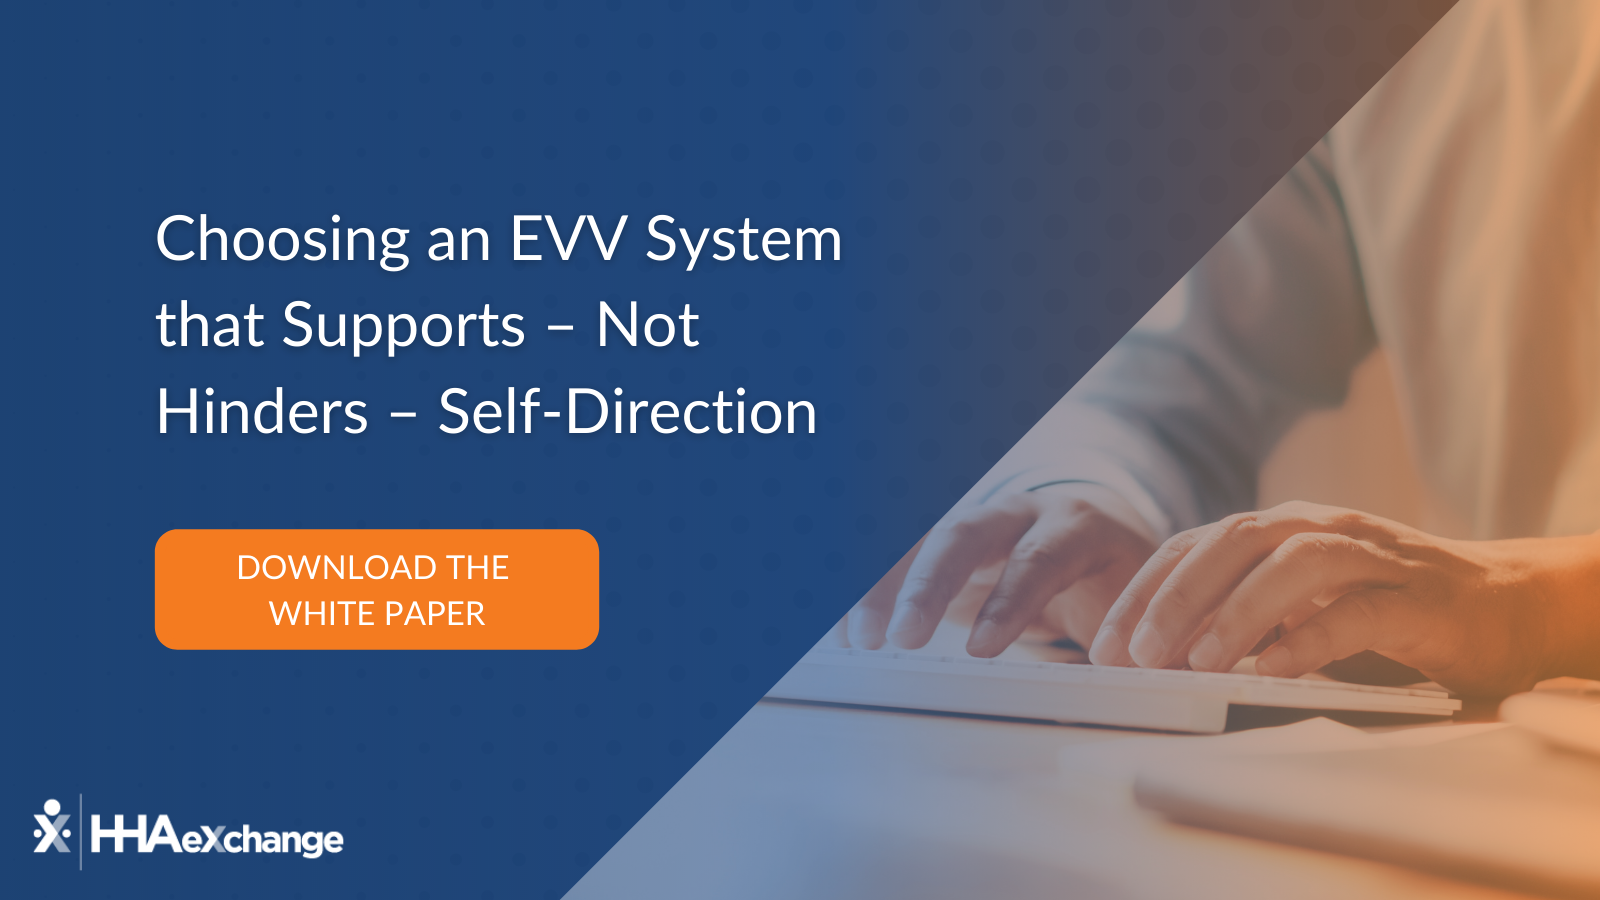 Choosing an EVV System that Supports, Not Hinders, SelfDirection for